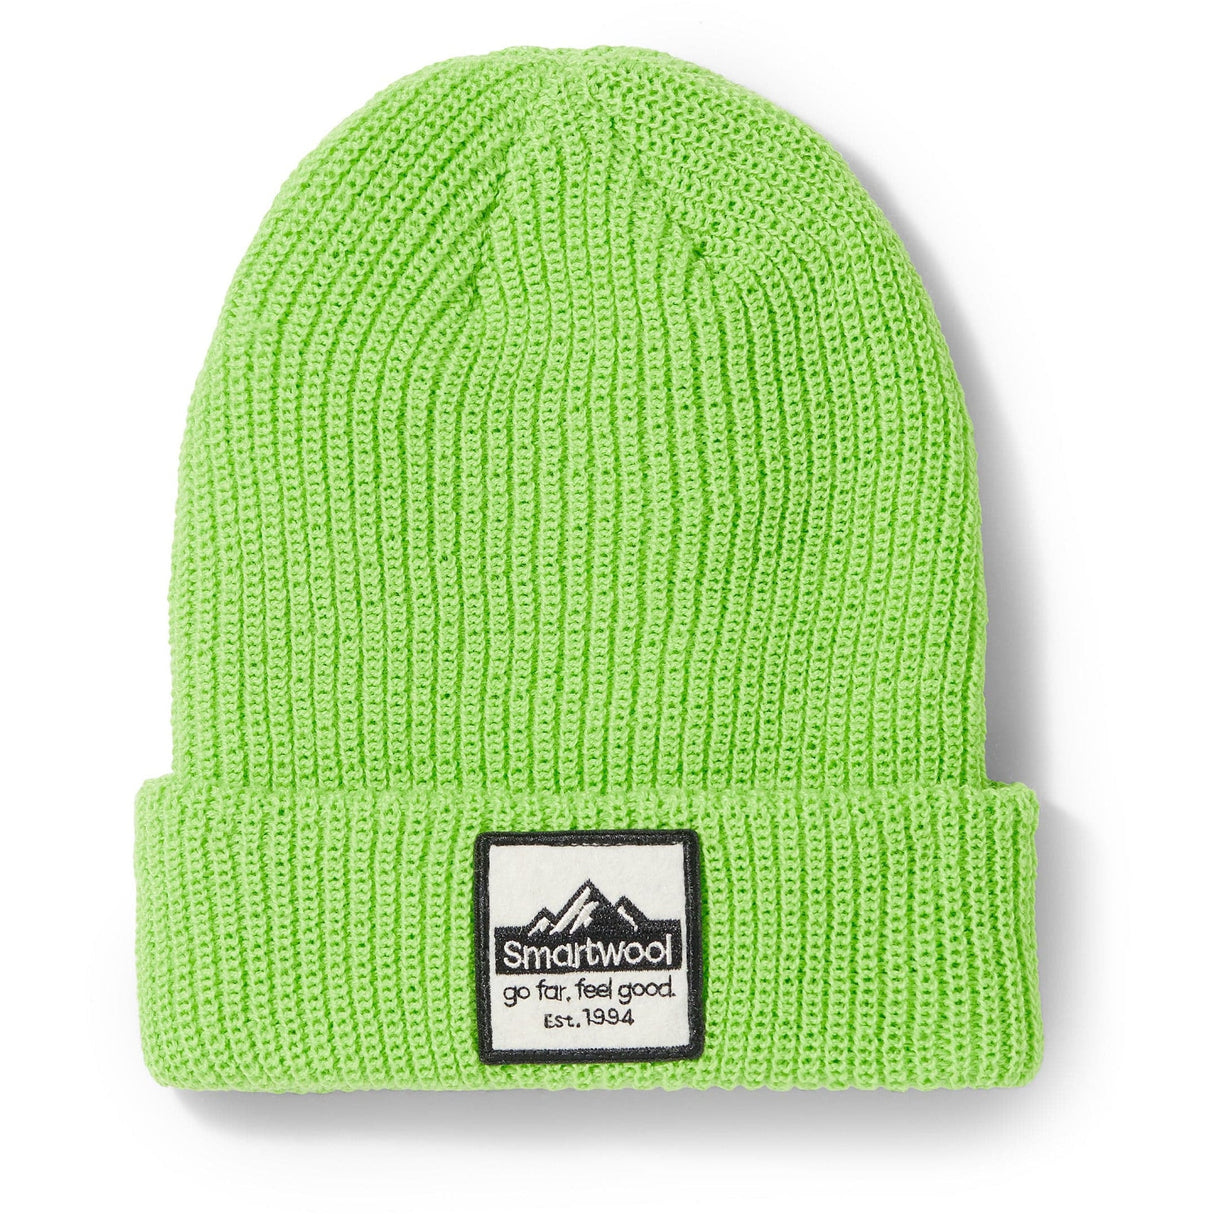 Smartwool Kids Patch Beanie  -  Small/Medium / Electric Green